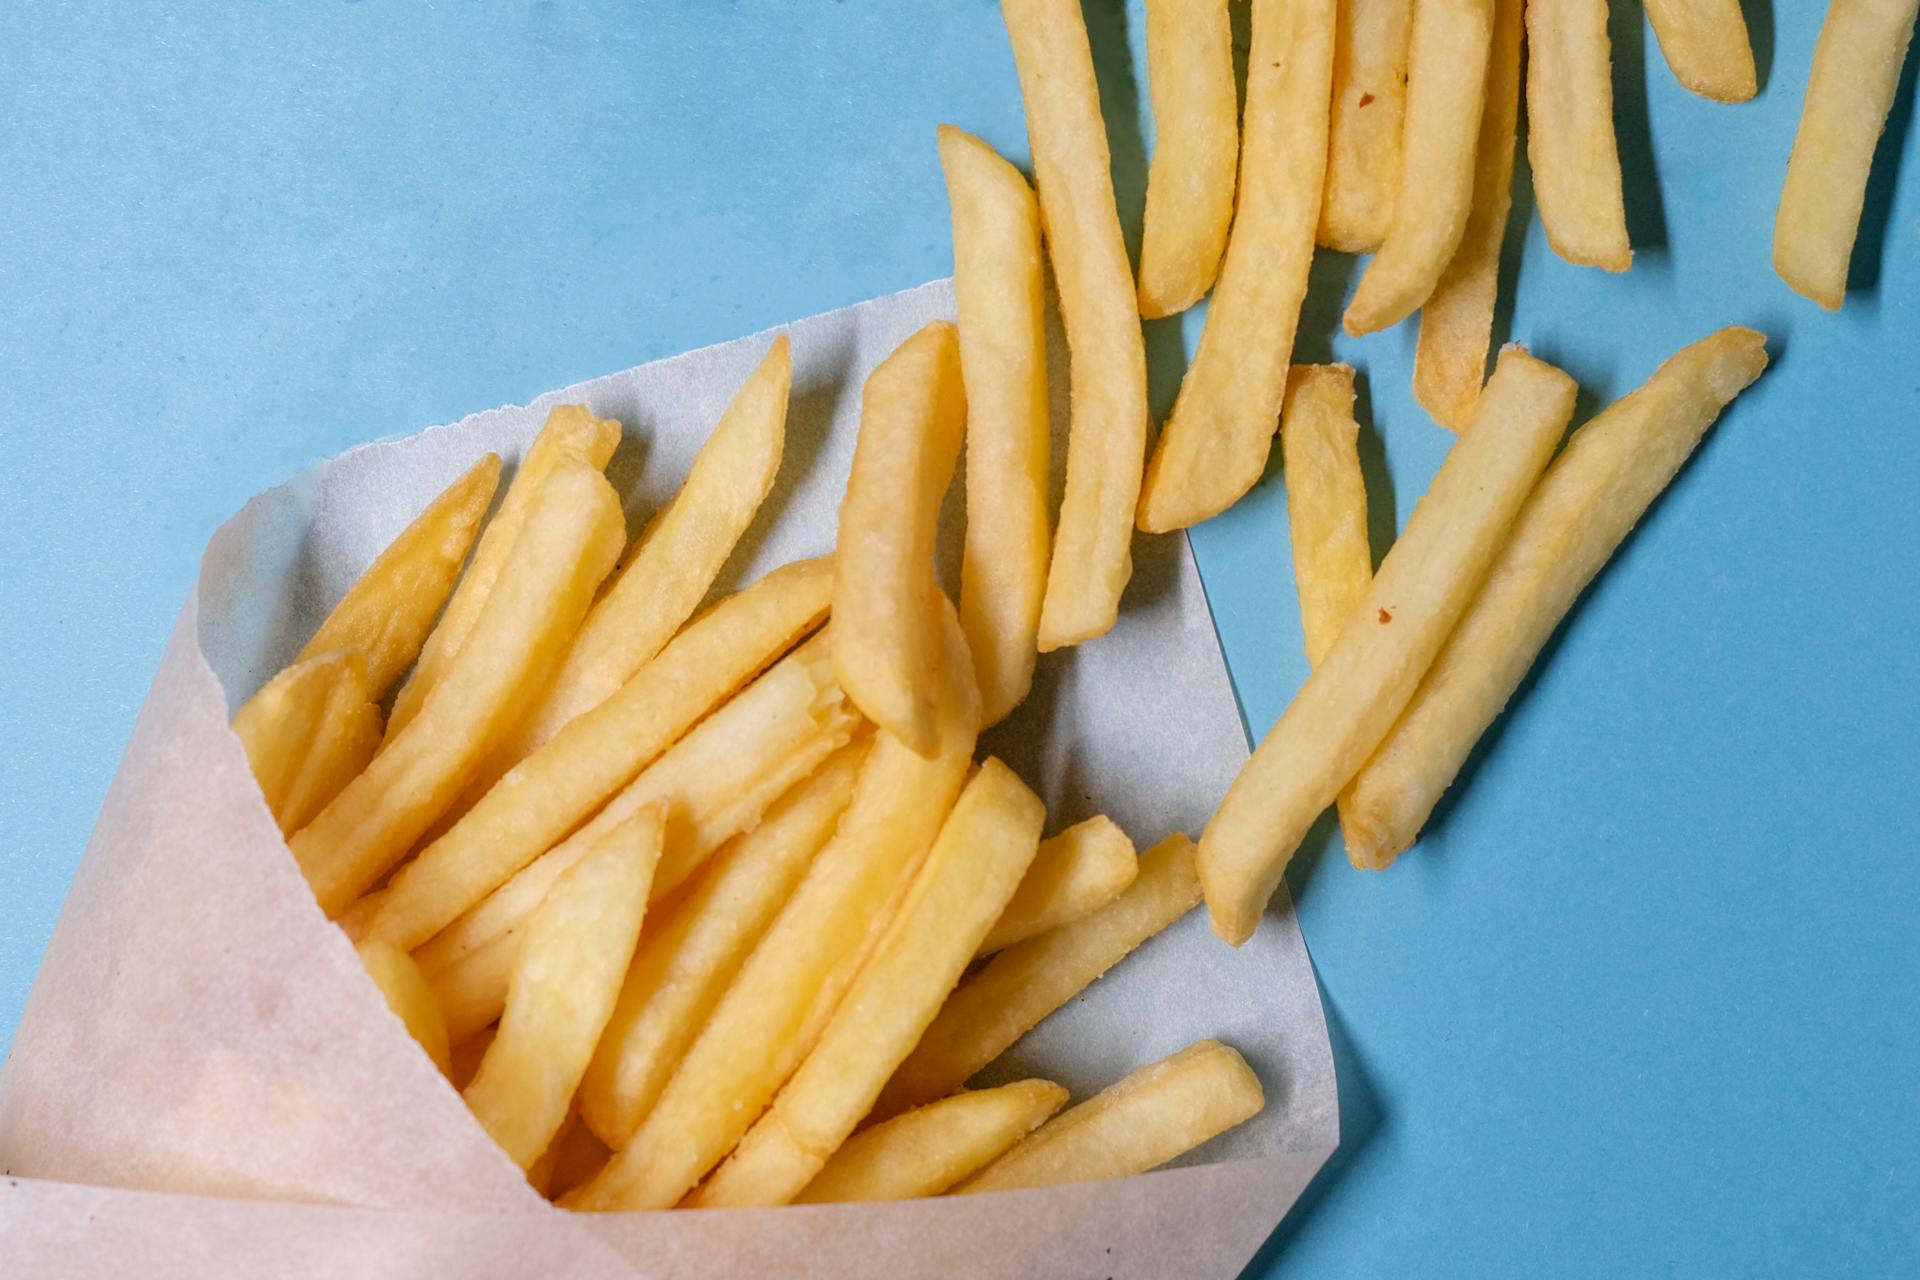 Top view of tasty french fries in paper placed on blue table in light studio